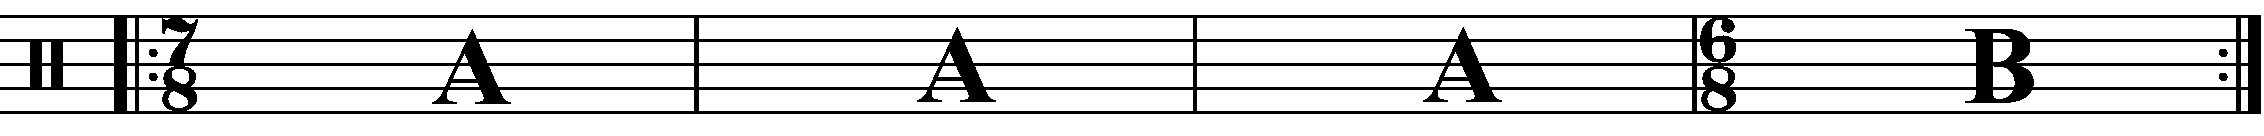 A four bar phrase using 7/8 for the 'B' section.